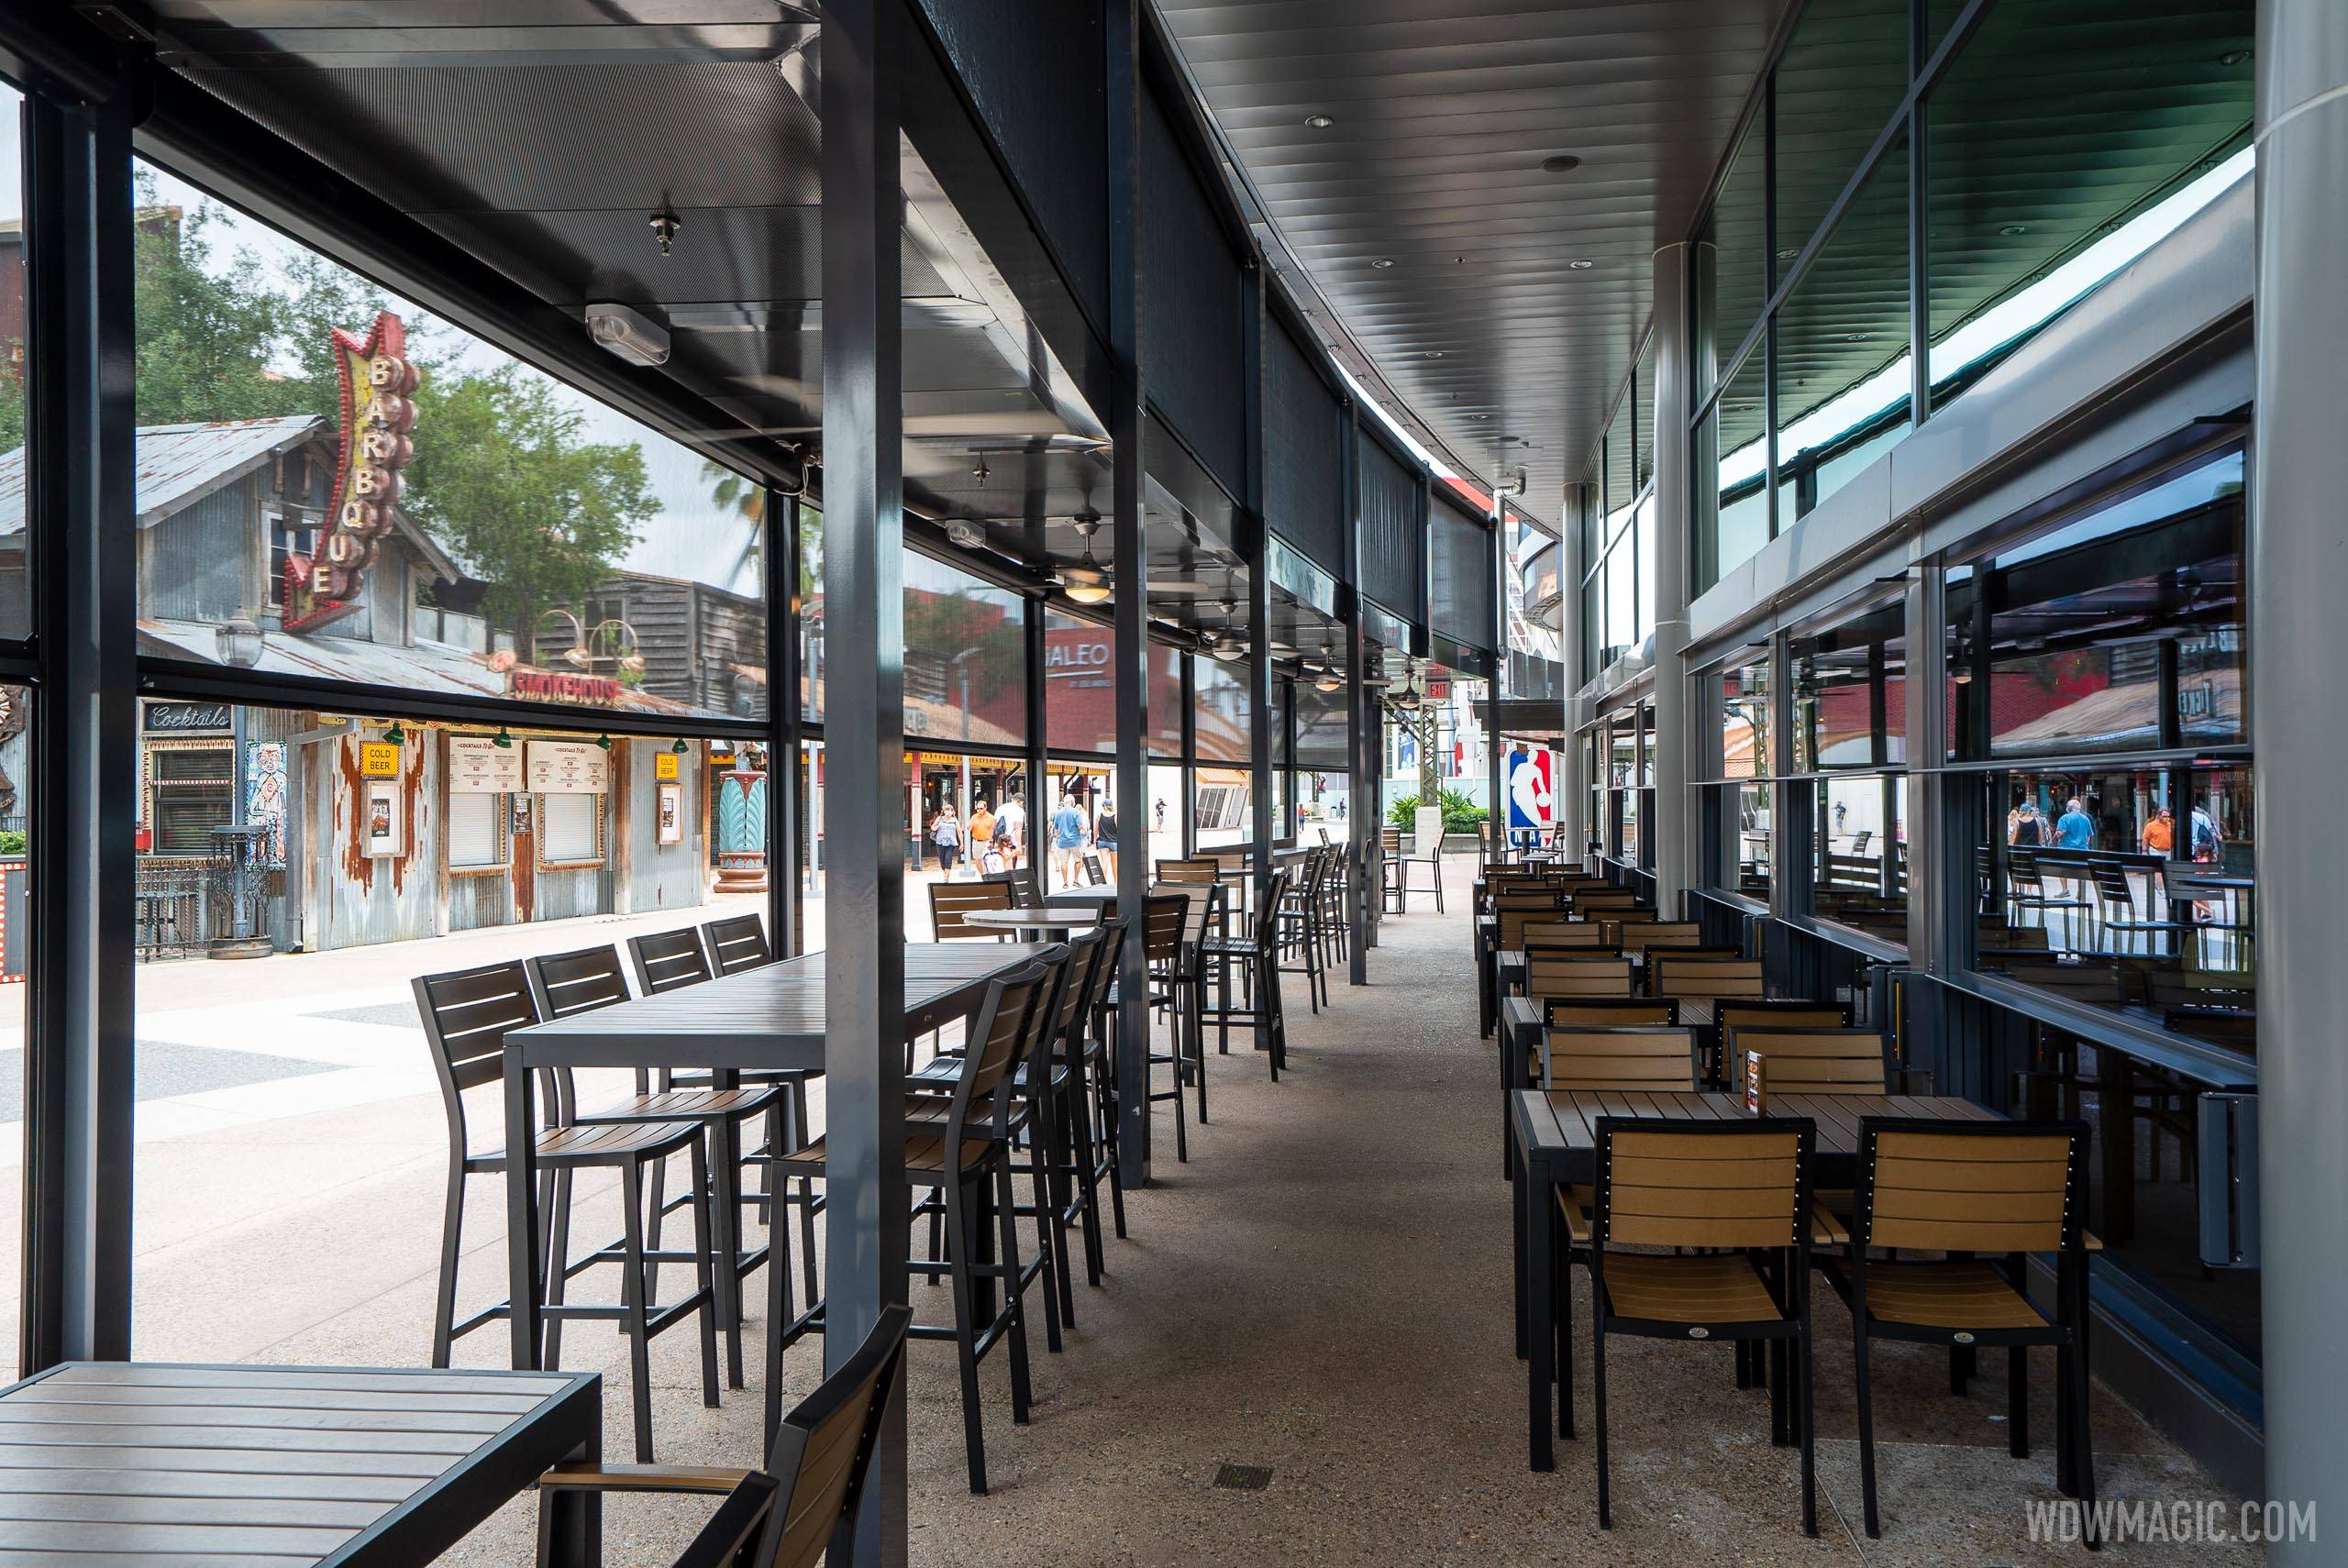 Completed outdoor seating canopy at City Works Eatery and Pour House